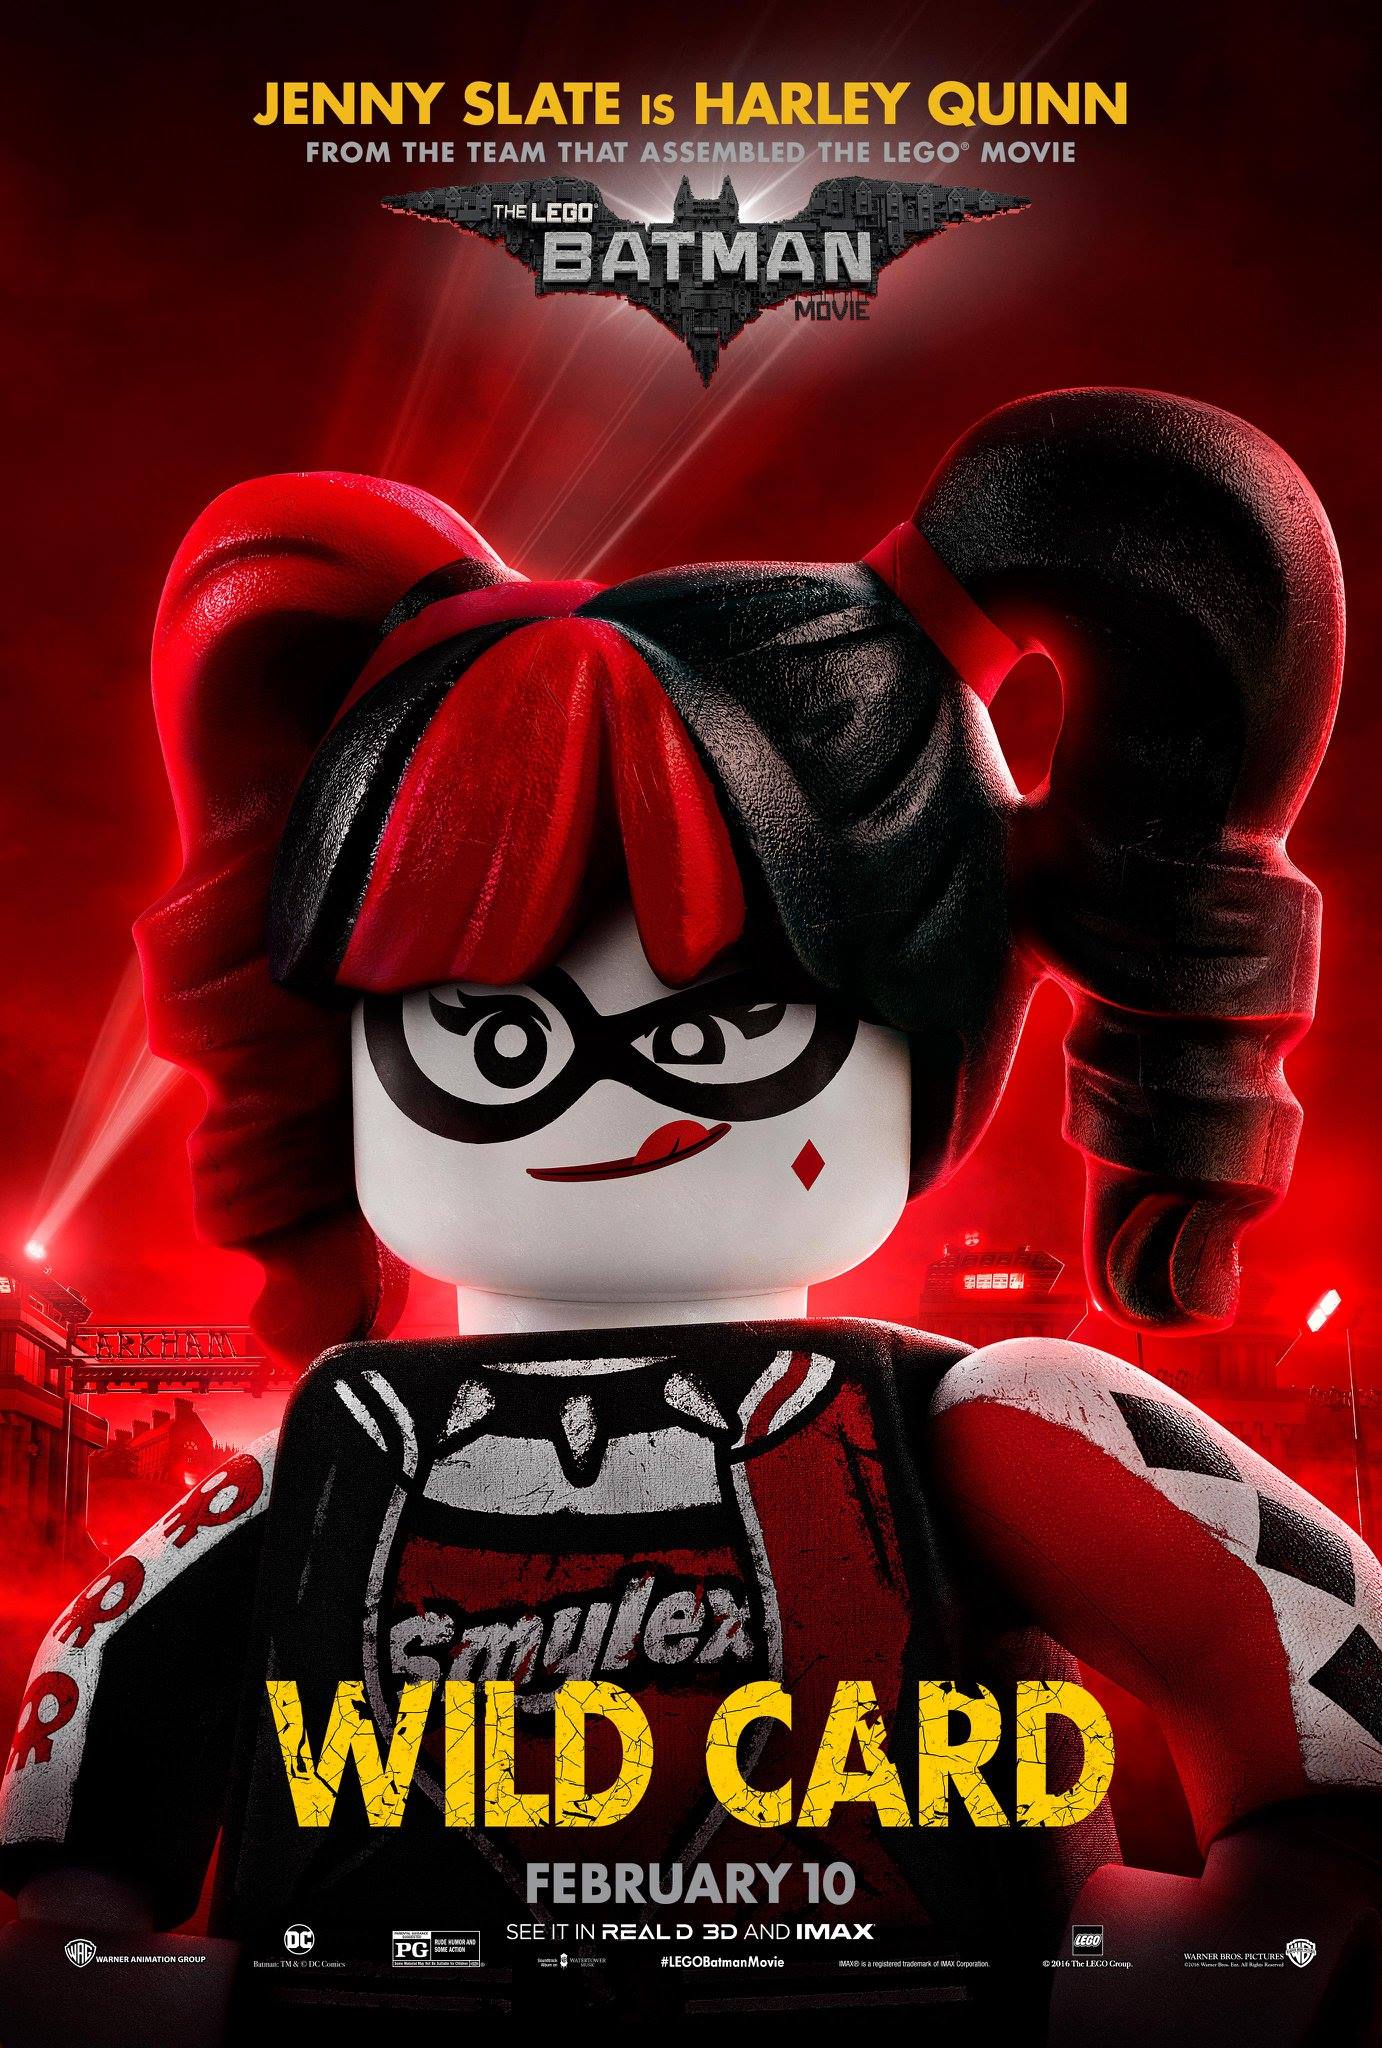 Six New Lego Batman Movie Posters Just Make It Look Better And Better